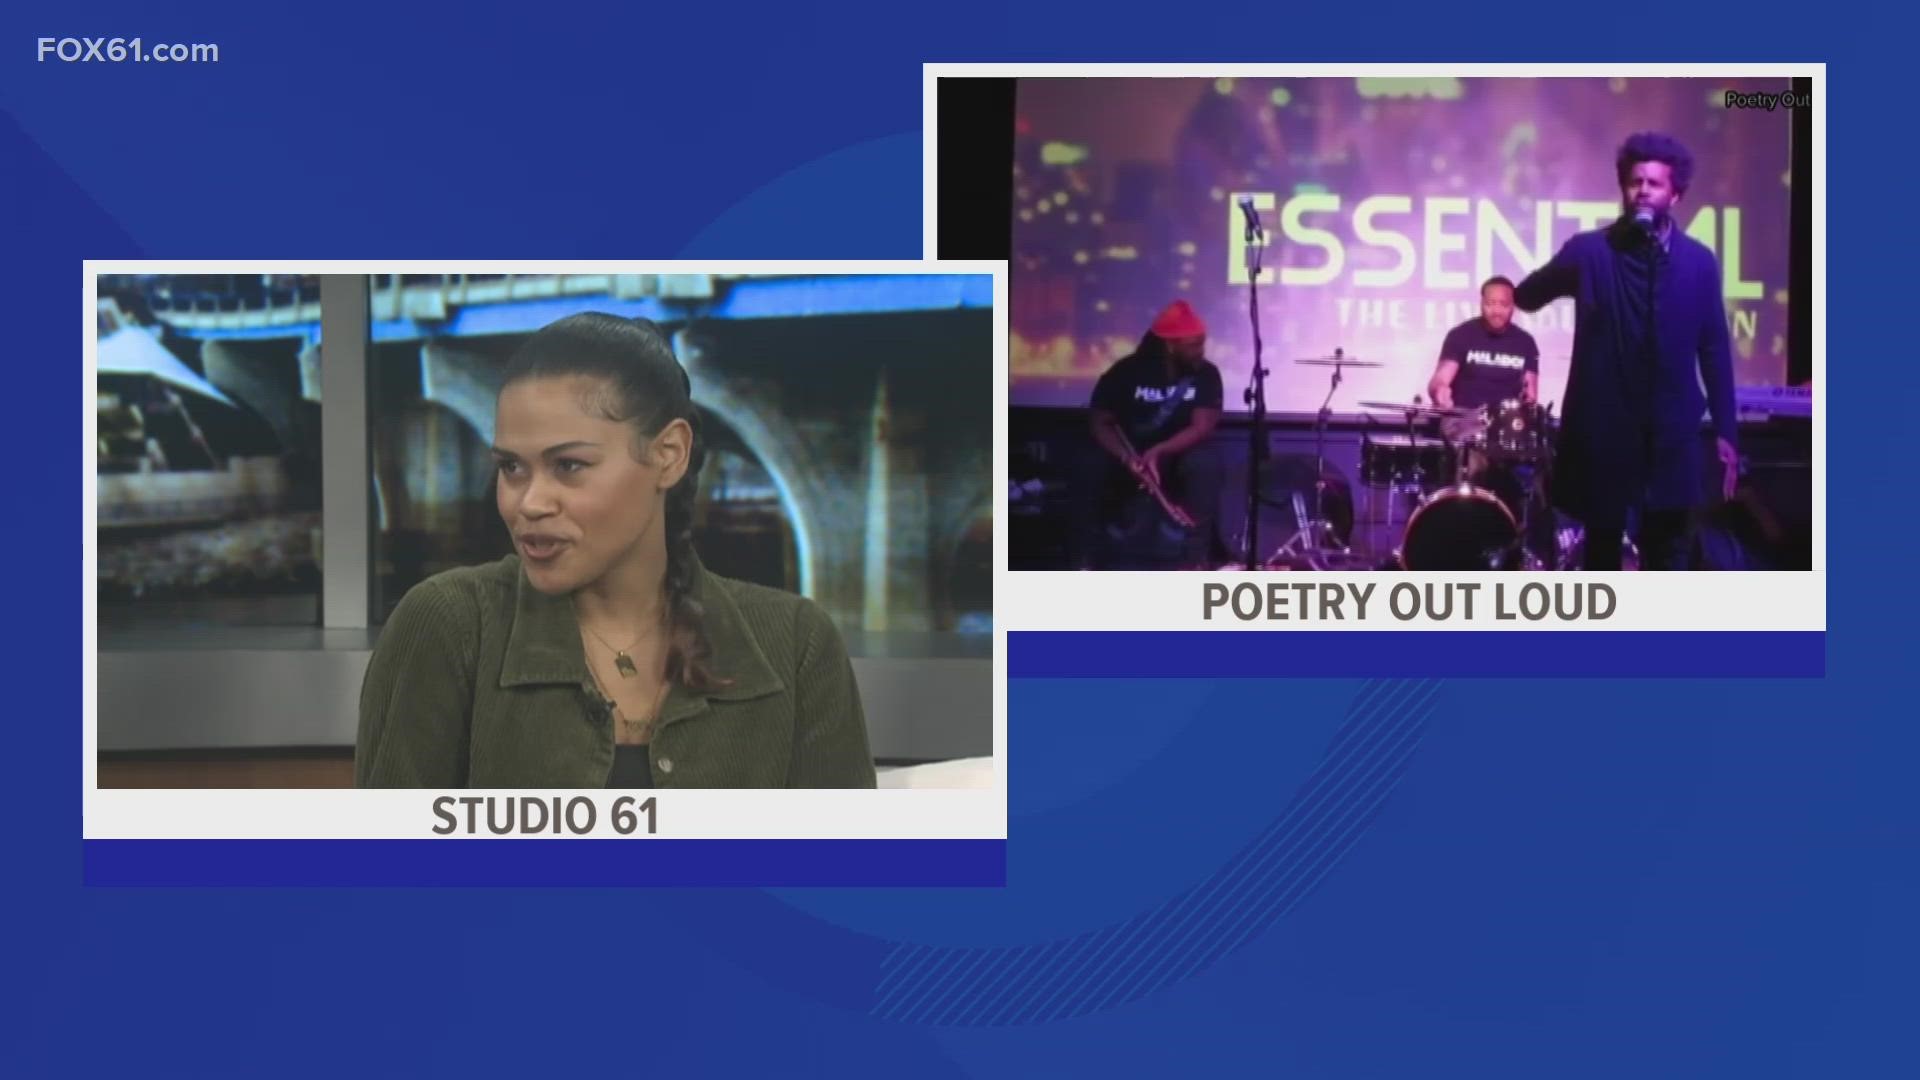 Tekowa Omara-Otunnu, Arts Education Manager for CT Office of the Arts, explains what Poetry Out Loud brings to high schoolers aspiring to be poets.